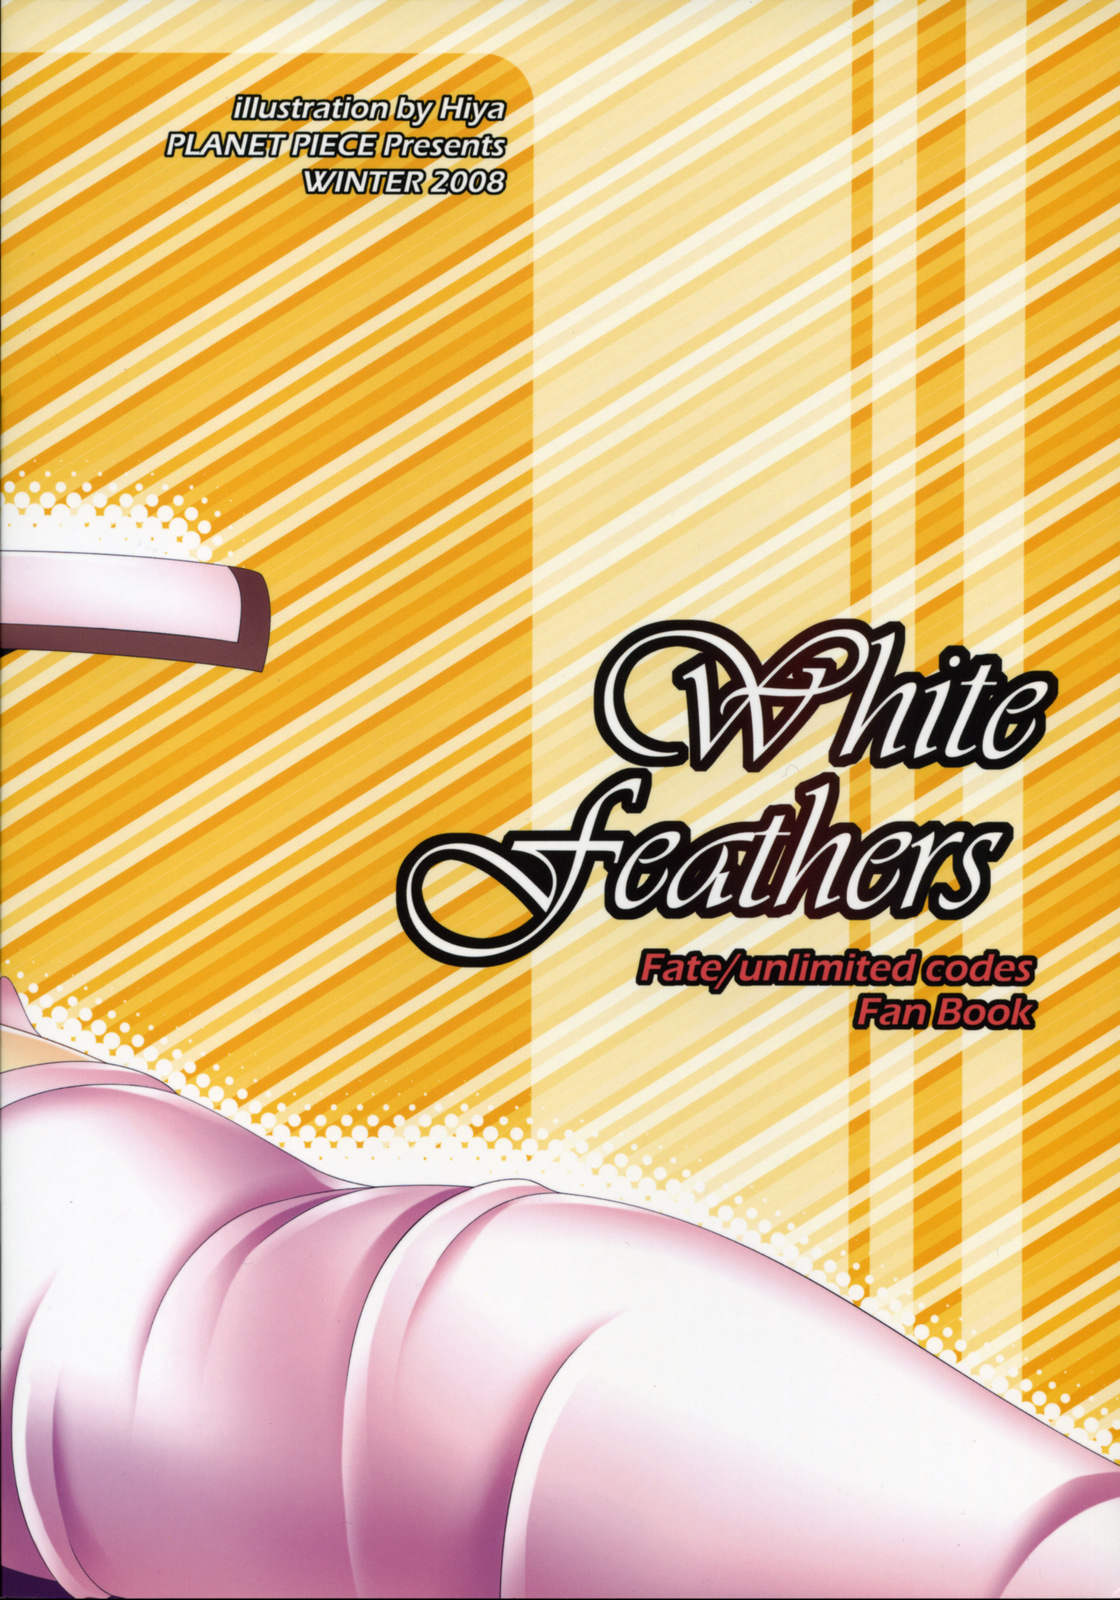 (C75) [PLANET PIECE (Hiya)] white feathers (Fate/unlimited codes) page 31 full